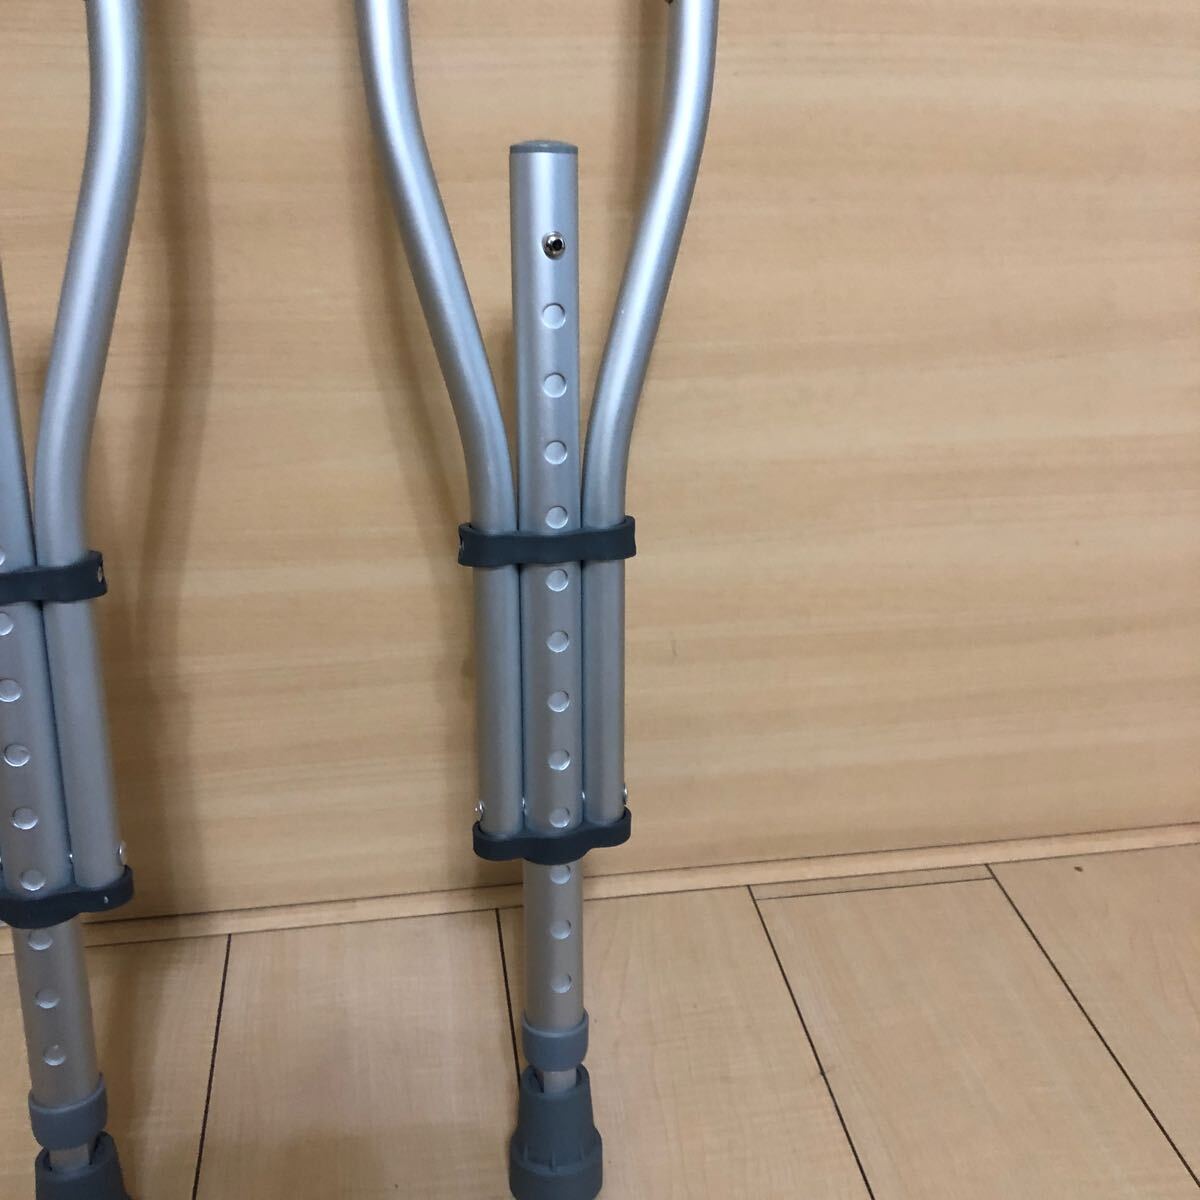  crutches walking assistance maximum adjustment : approximately 144 X 97 cm flexible type easy adjustment aluminium alloy made river north power .( made in China )